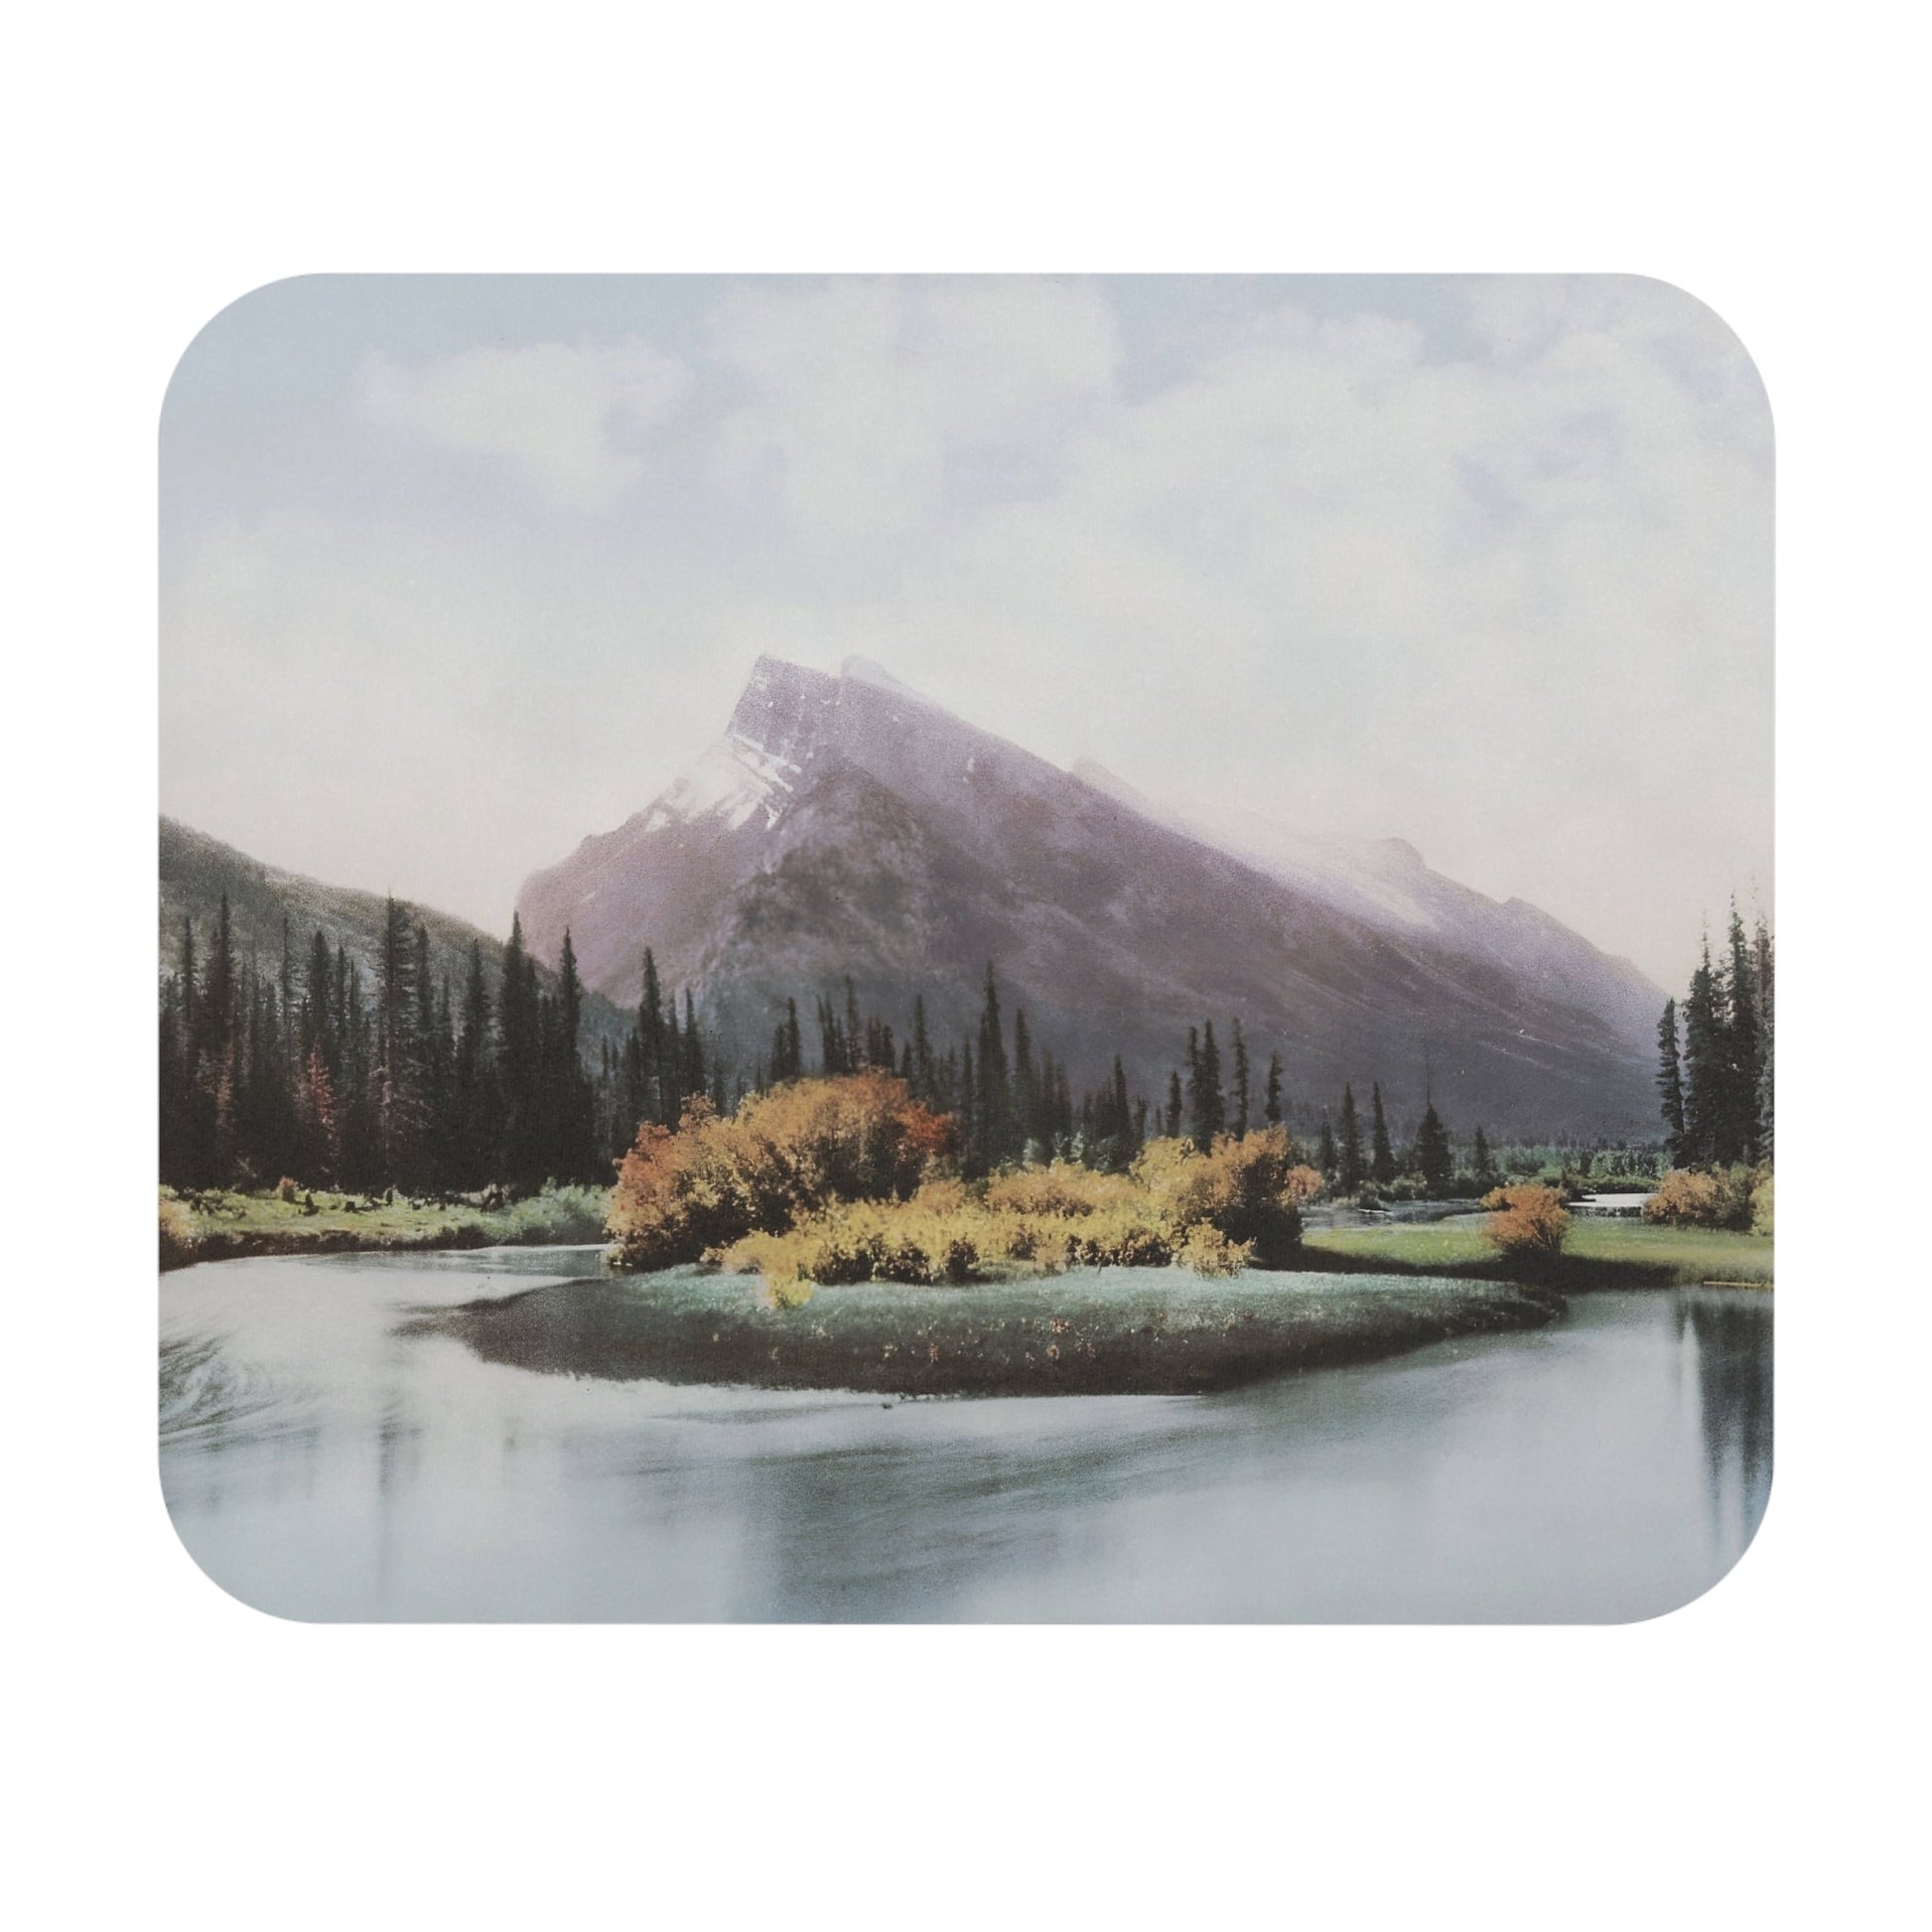 Canada Mountain Landscape Mouse Pad featuring a Mount Arundel scene, complementing desk and office decor.